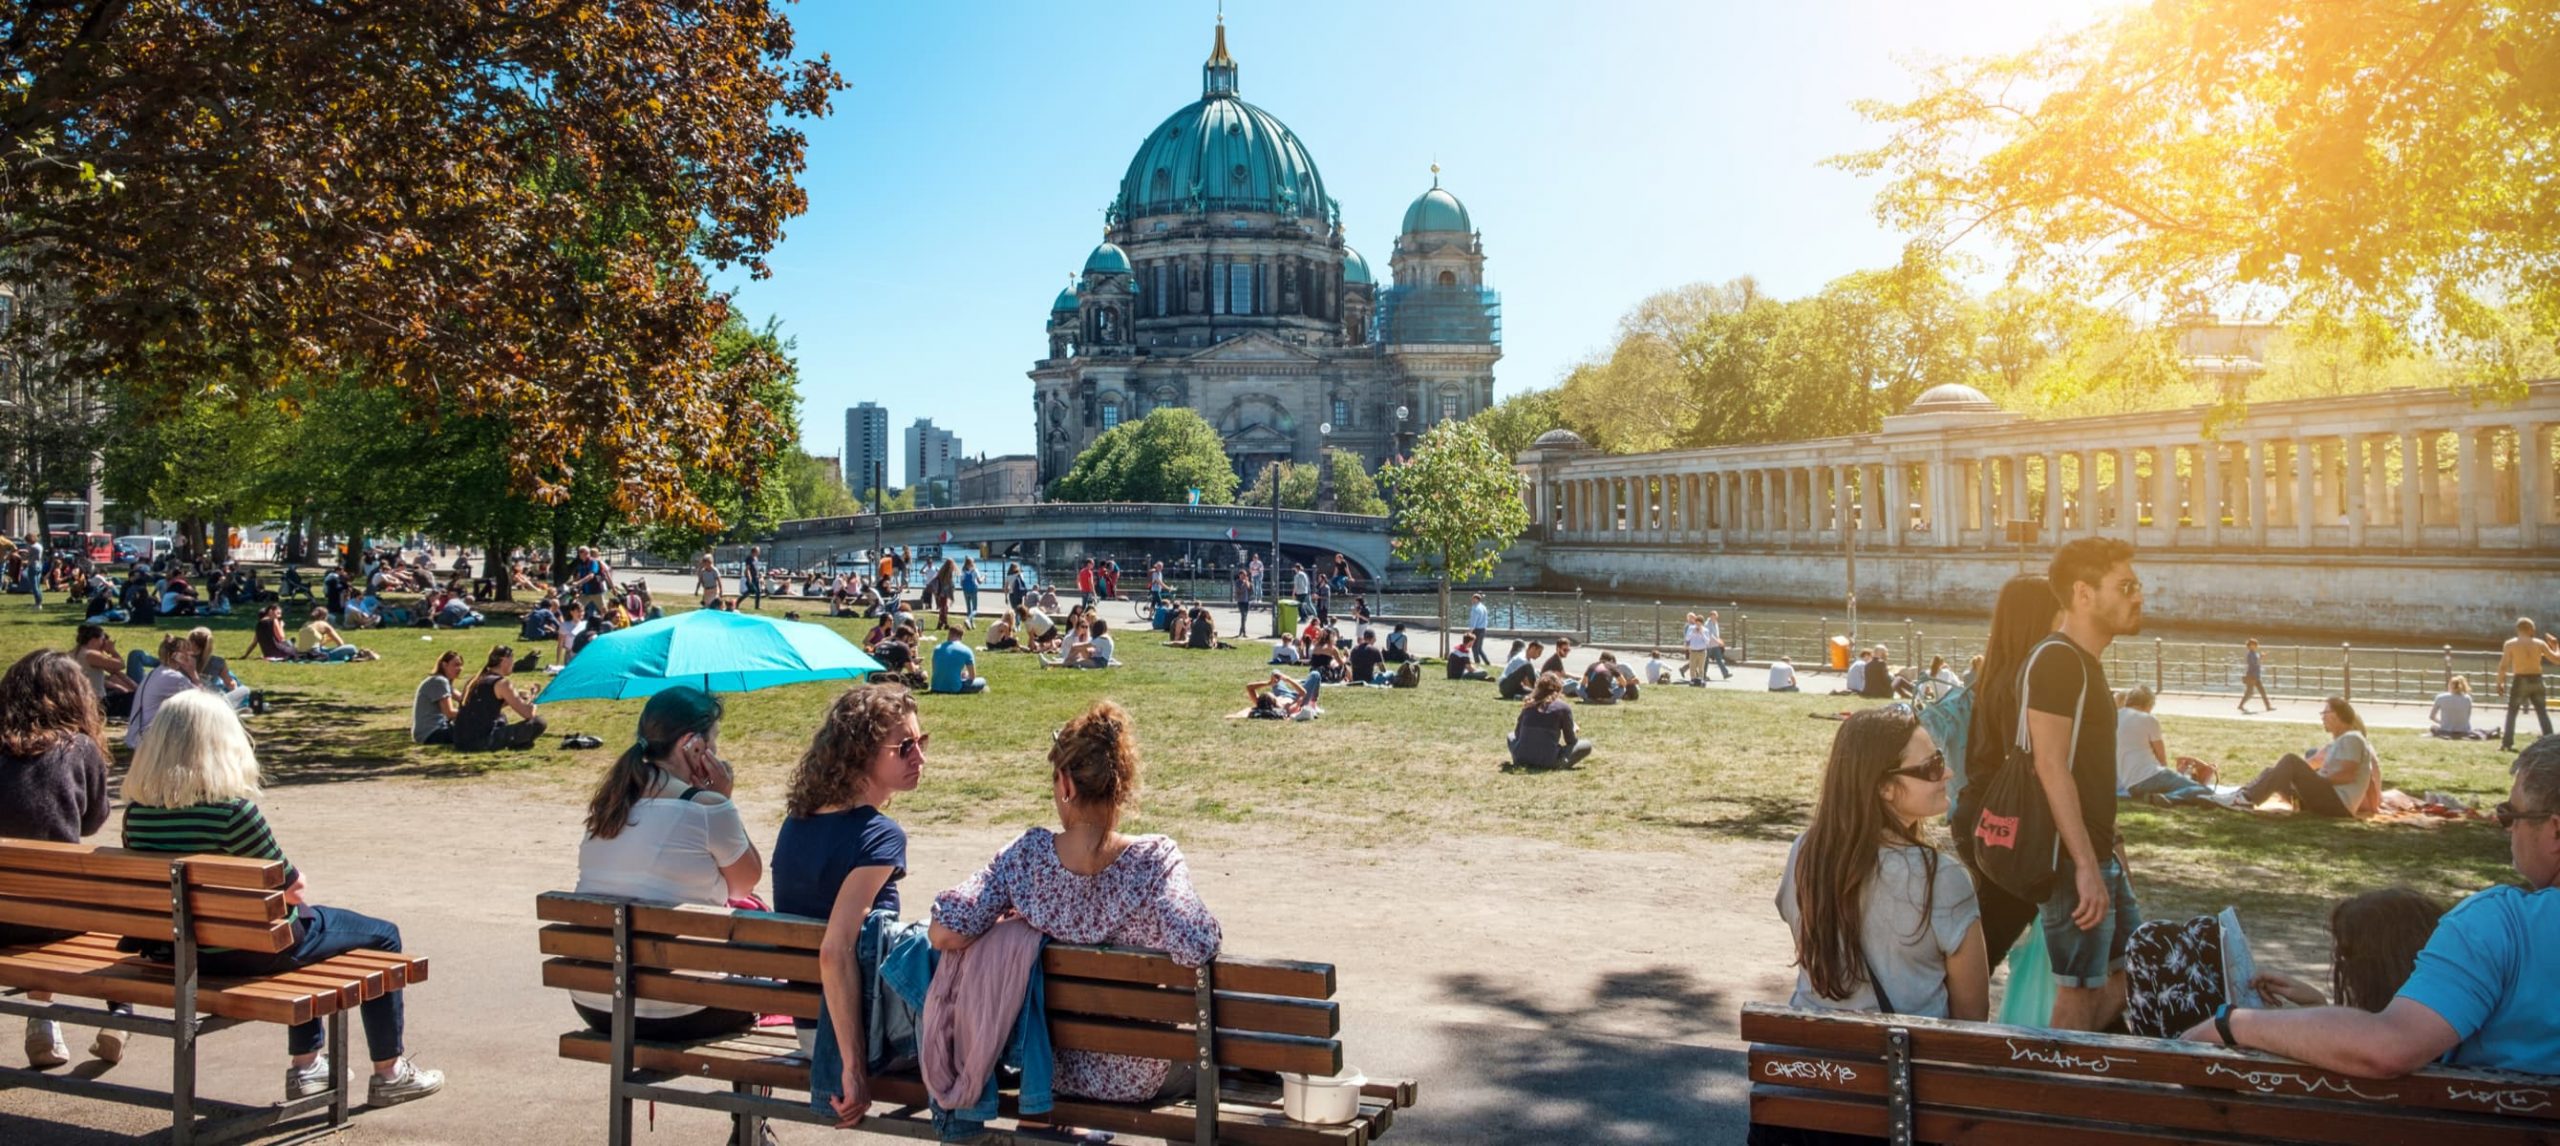 The vibrand Mitte area, in Berlin, with views of the Berlin Cathedral.